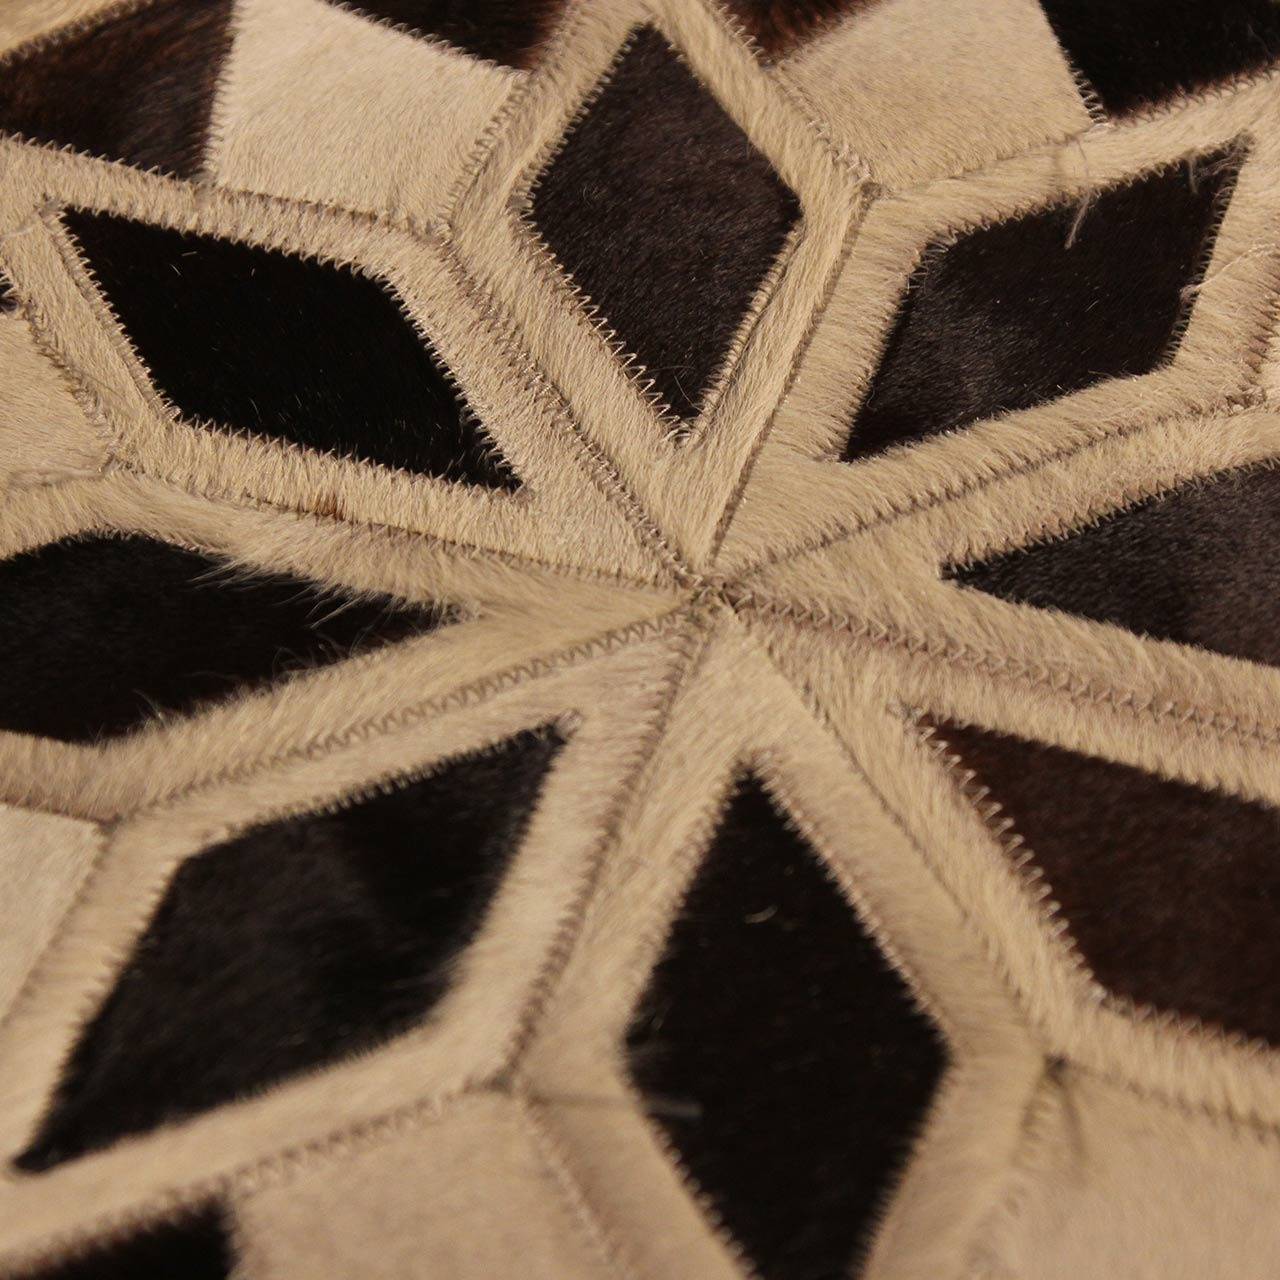 Native American brown and white leather cowhides, possibly used as drum covers, ceremonial mats or simply decorative.